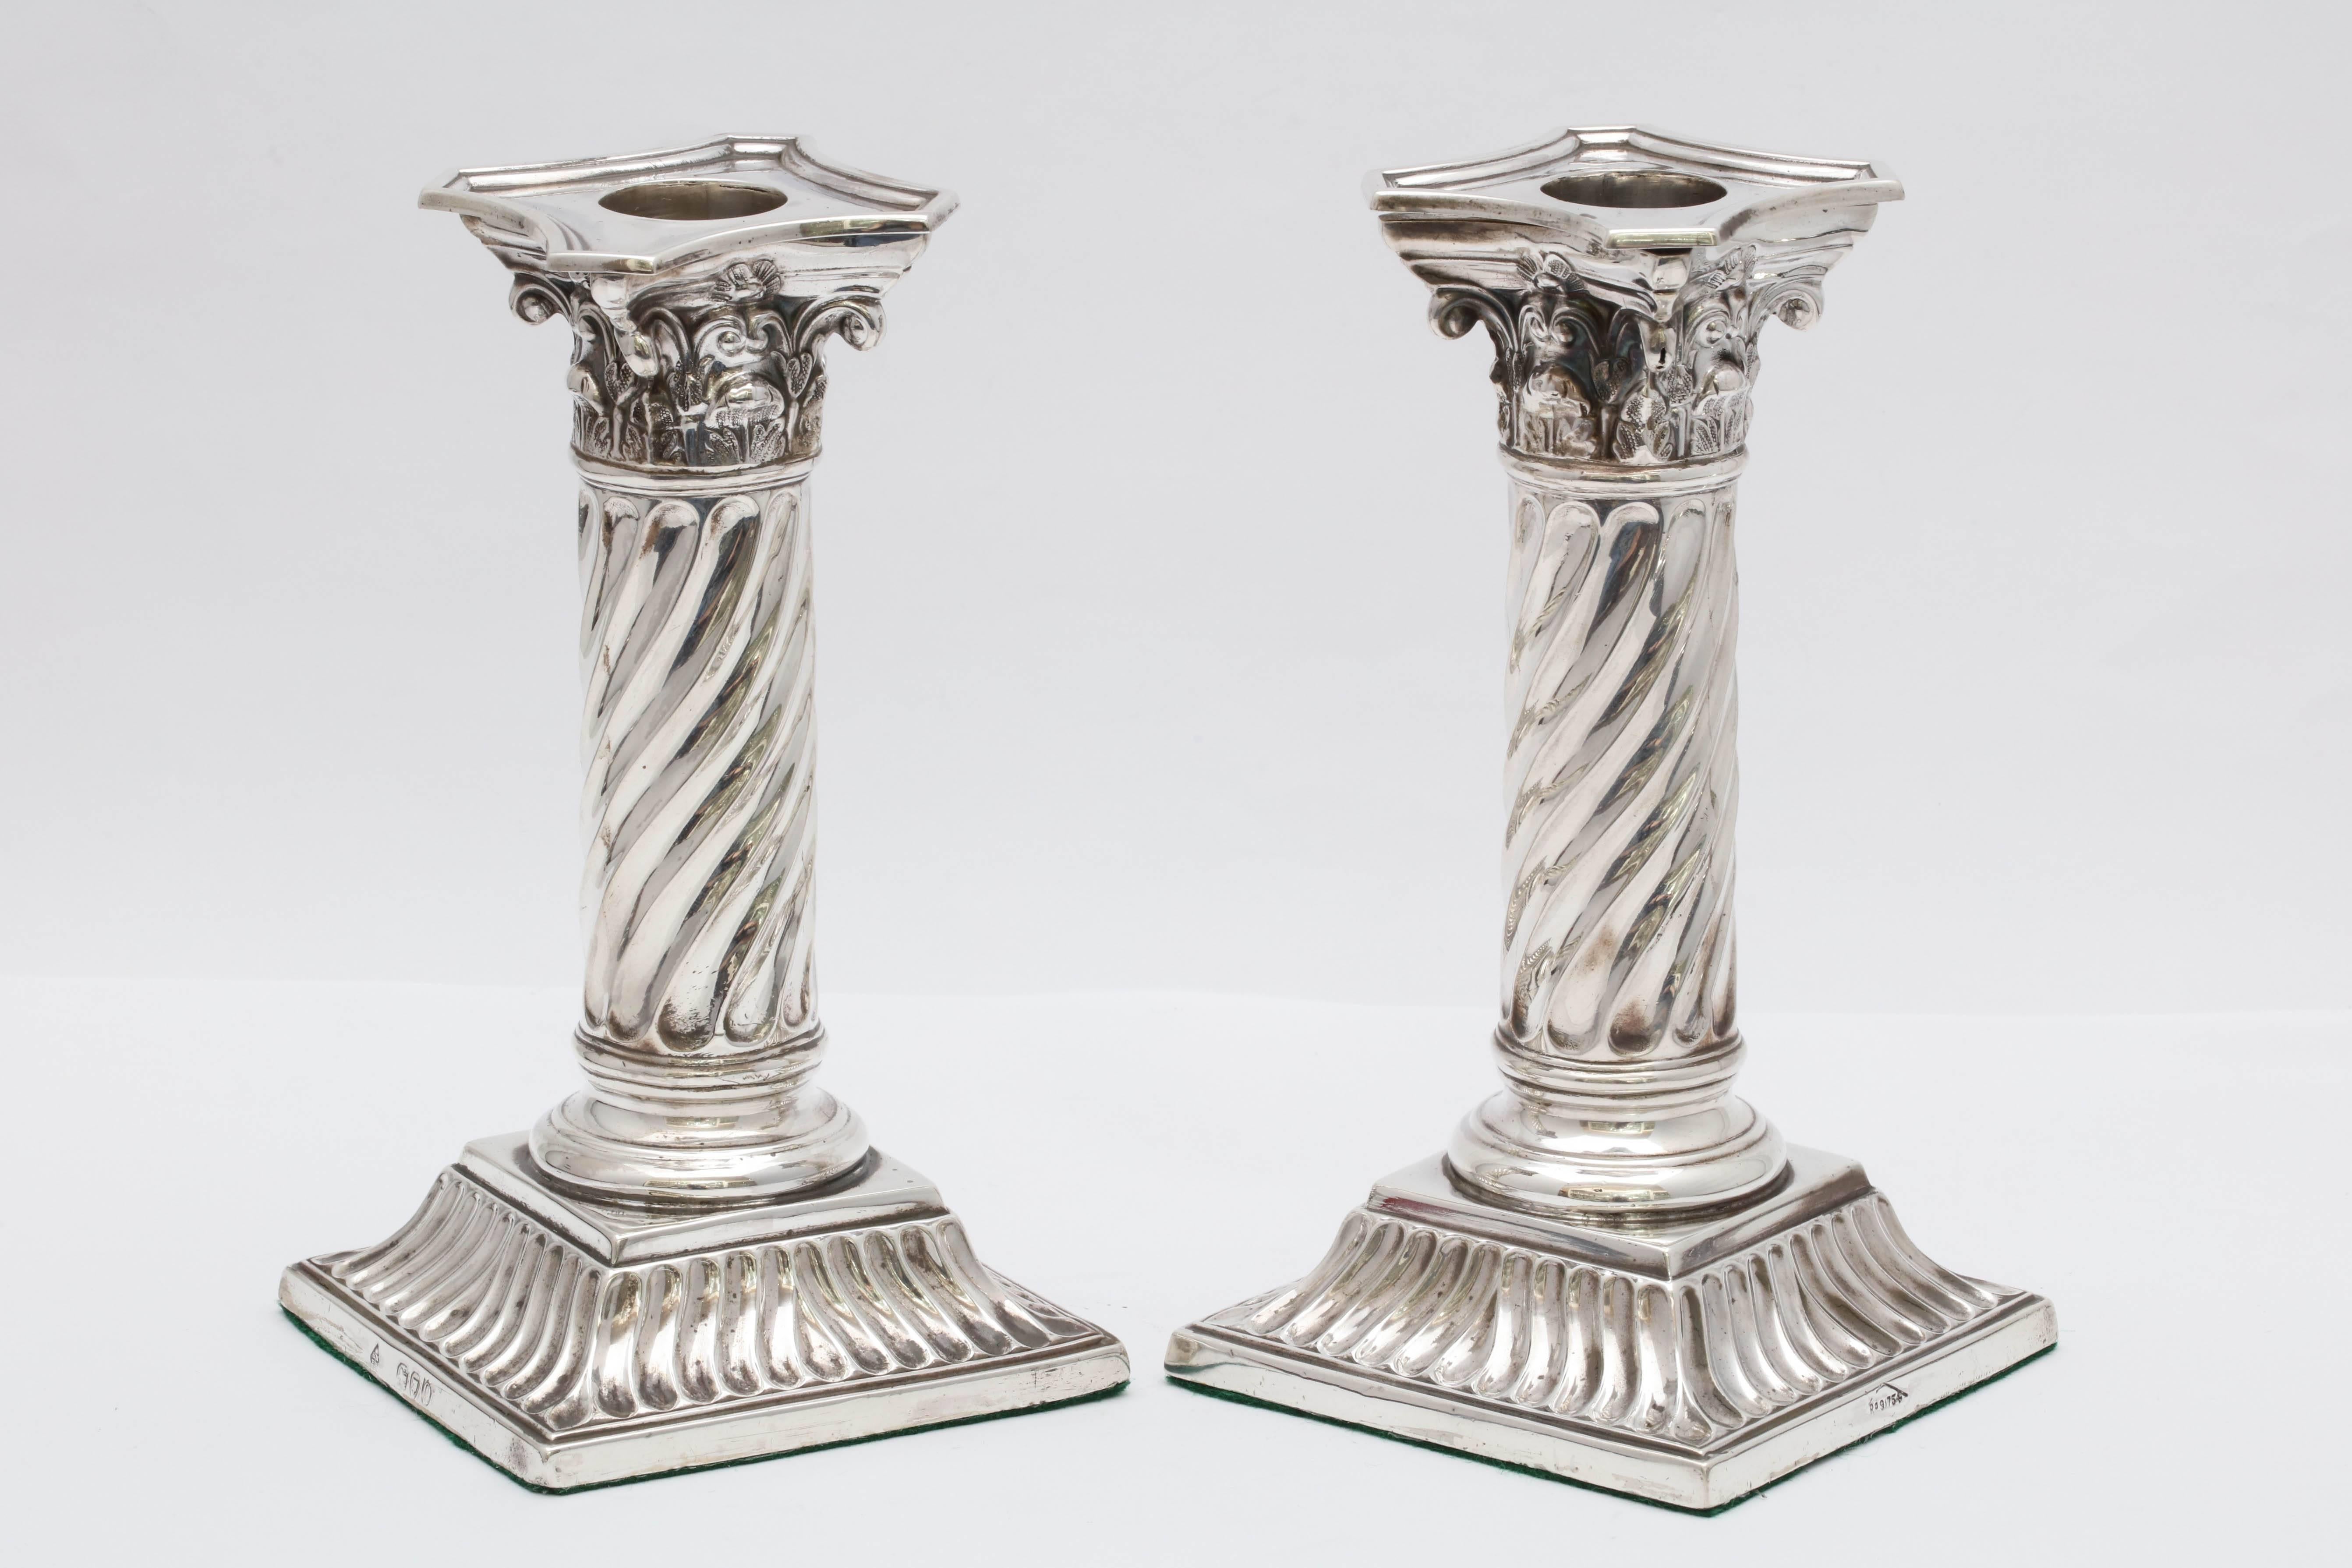 Rare, unusual pair of sterling silver,, neoclassical design, Corinthian column candlesticks, London, 1891, Martin and Hall - makers. Measures: 6 inches high x 3 1/4 inches wide x 3 1/4 inches deep. Weighted. Removable bobeches. Columns are spiral in